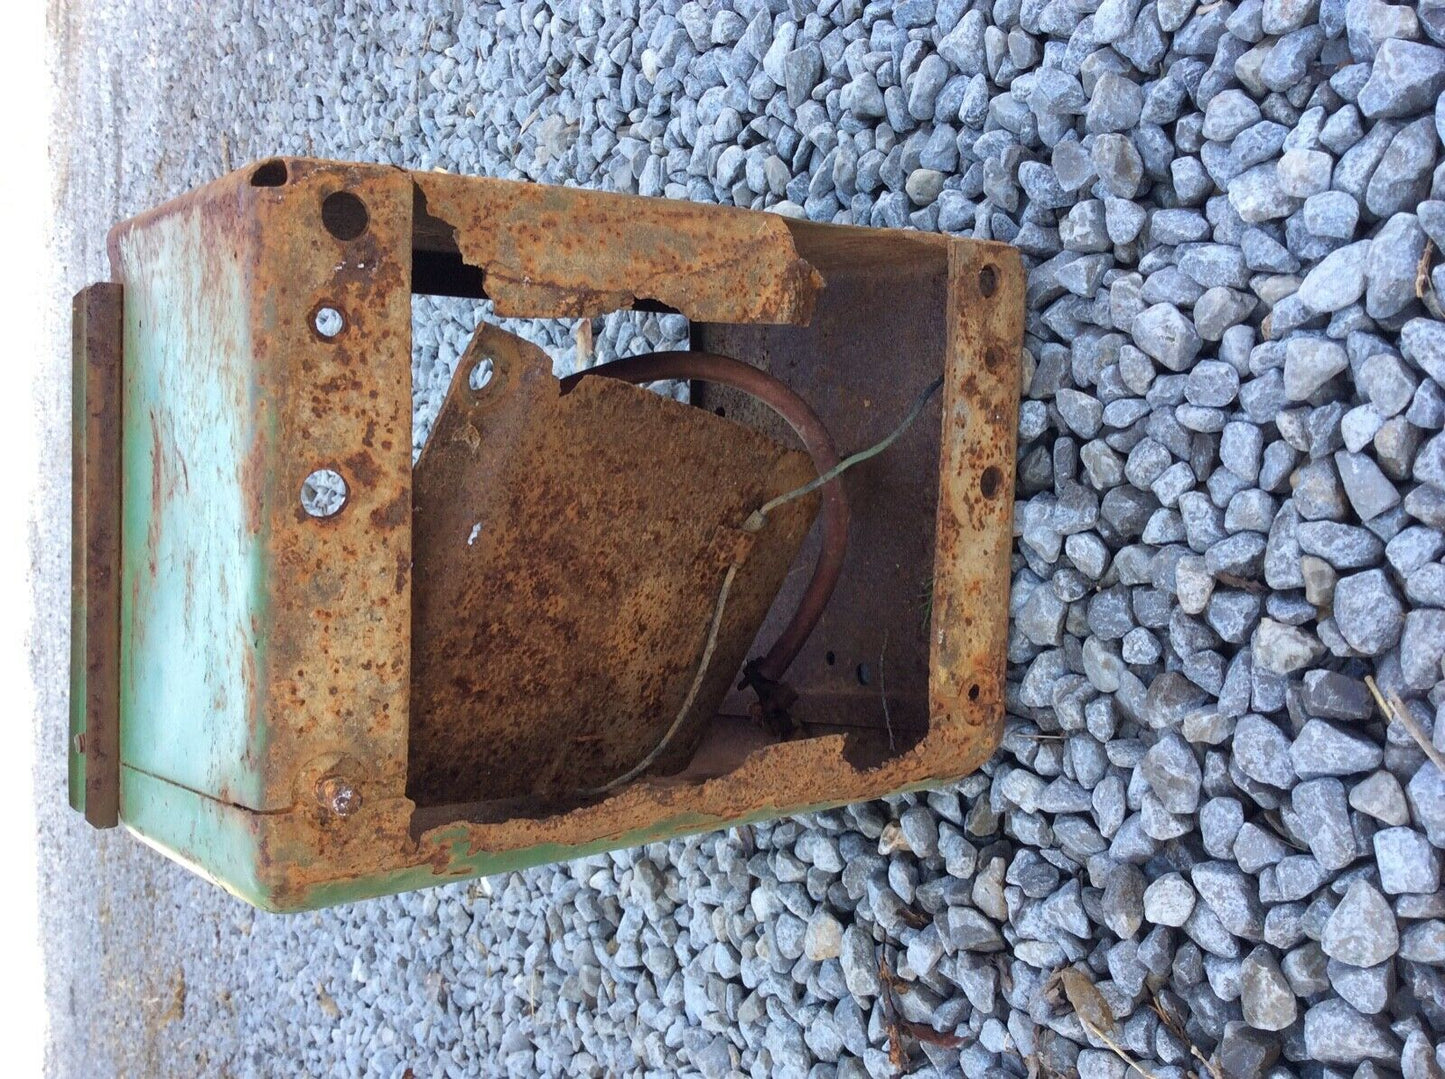 AB4101R John Deere Battery Box With Battery Tray And Caution Plate For B, R, 80